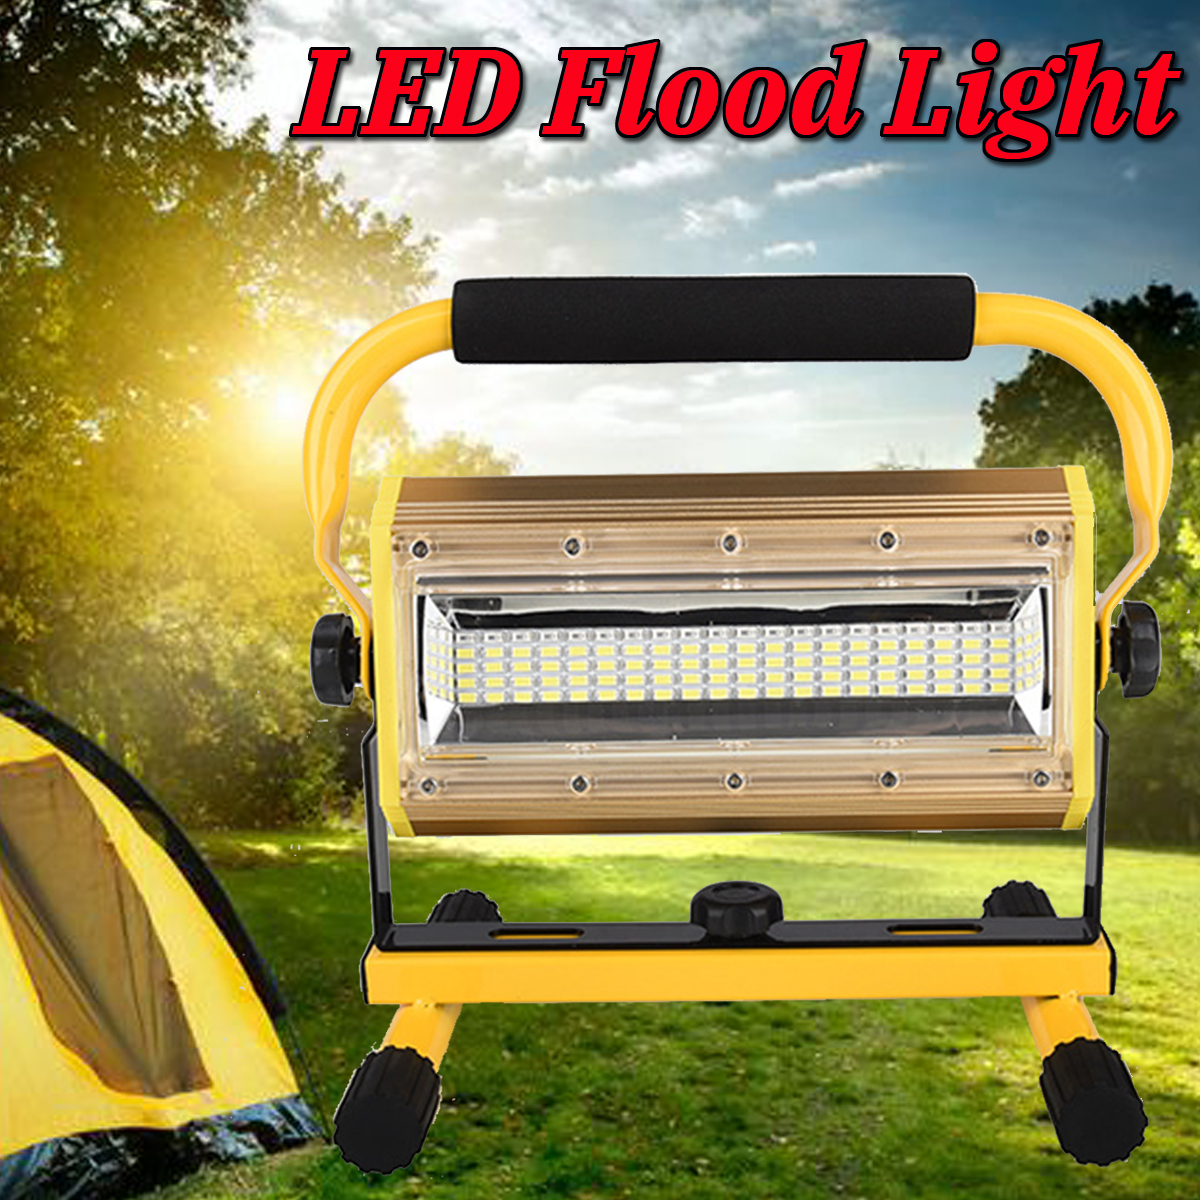 100W-37V-2400Lumens-3Modes-Rechargeable-LED-Floodlight-IP64-Waterproof-Security-Light-1581044